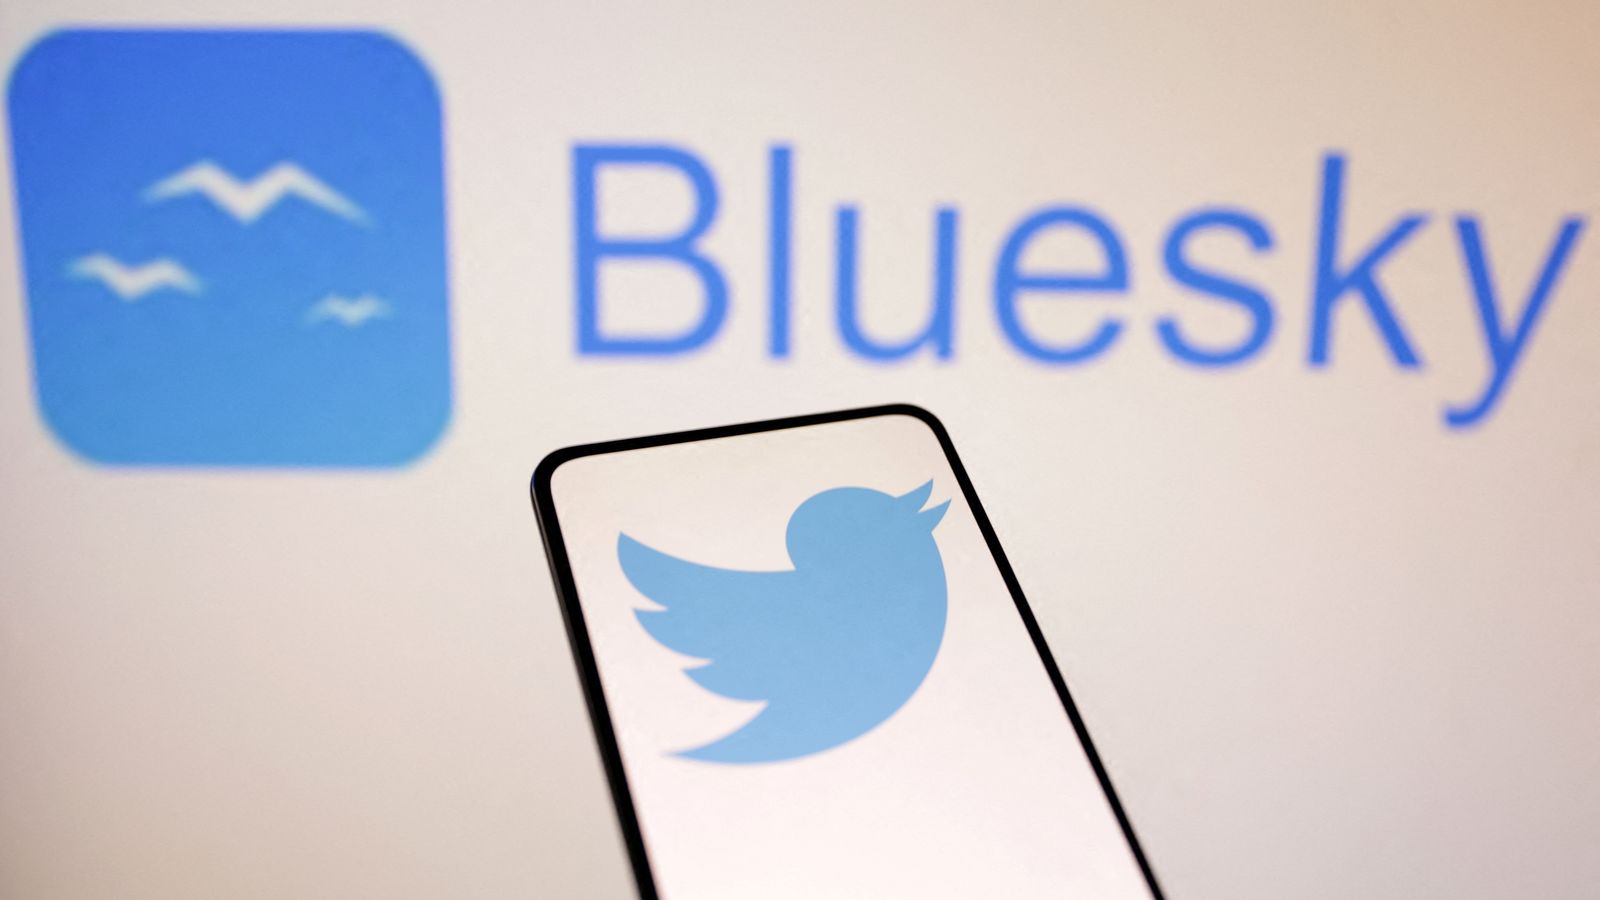 Bluesky invites become a hot commodity as demand for the Twitter  alternative outstrips access